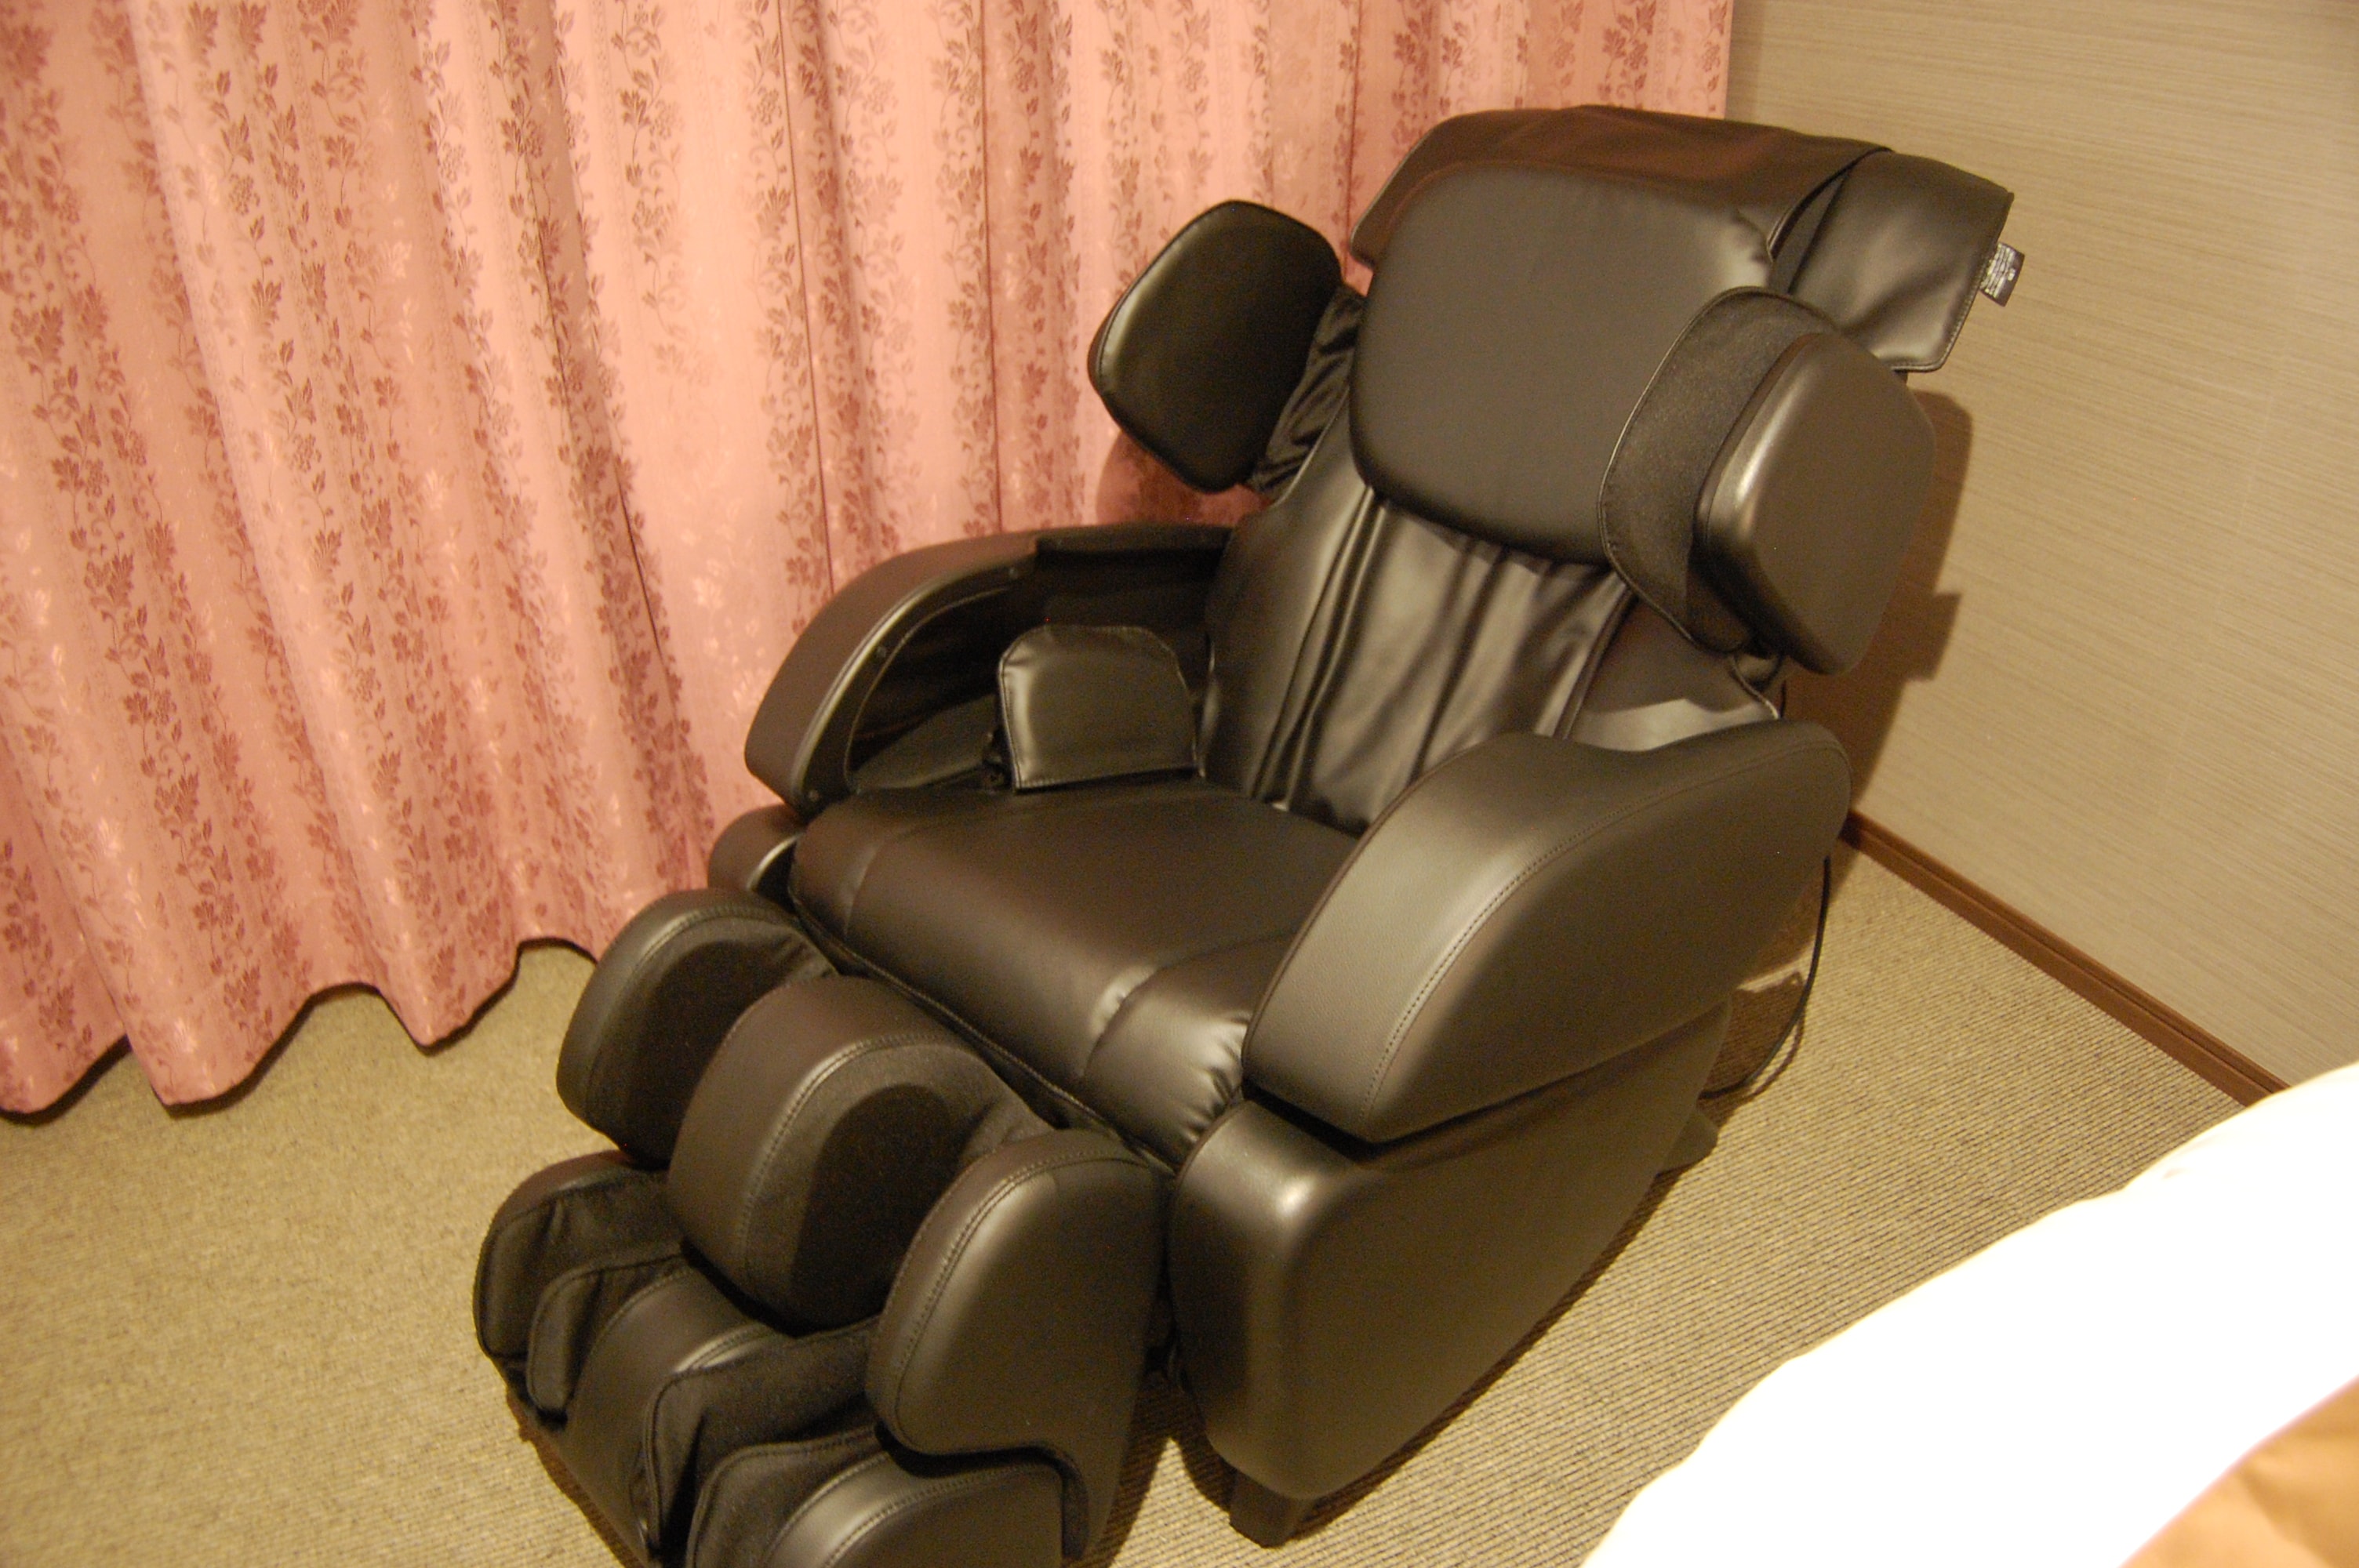 All rooms are equipped with reclining massage chairs